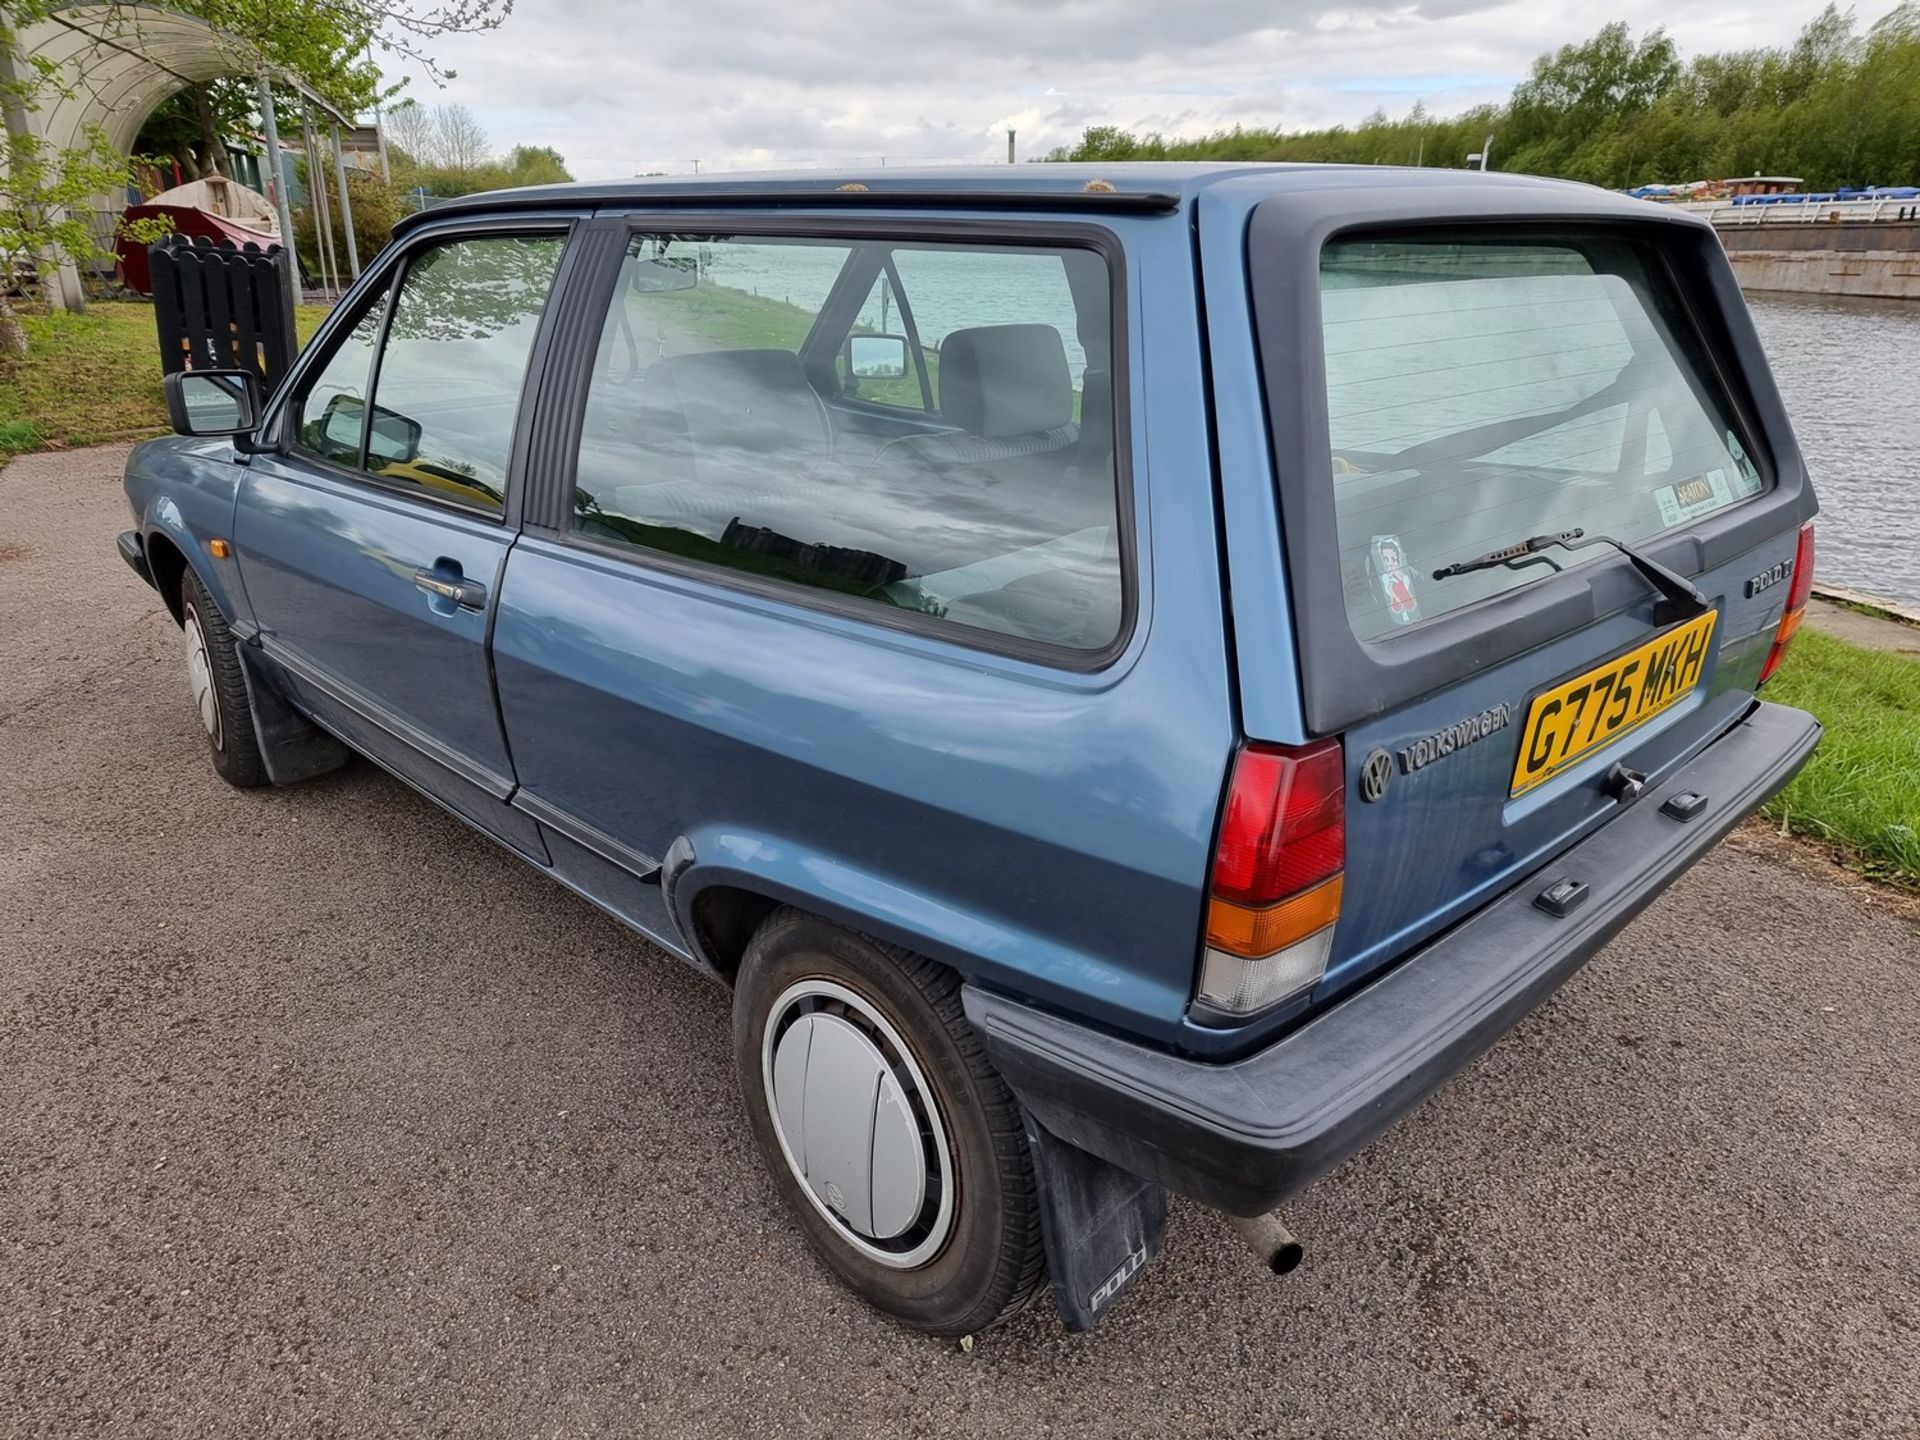 1989 VW Polo Mk2, 1272cc. Registration number G775 MKH. Chassis number WVWZZZ80ZKW168973. Engine - Image 4 of 16